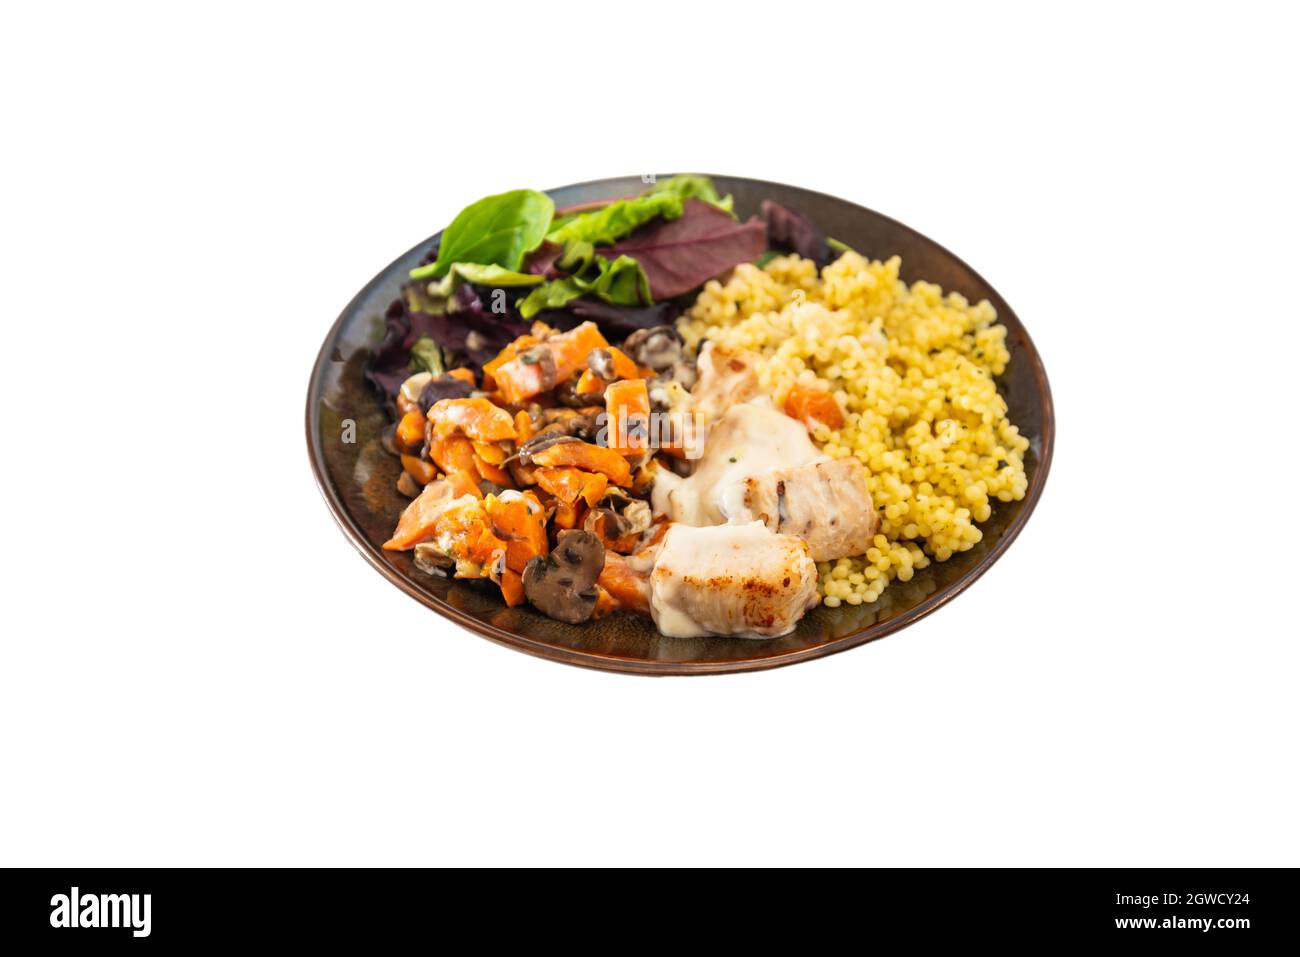 Close-up Of Food In Bowl Against White Background Stock Photo